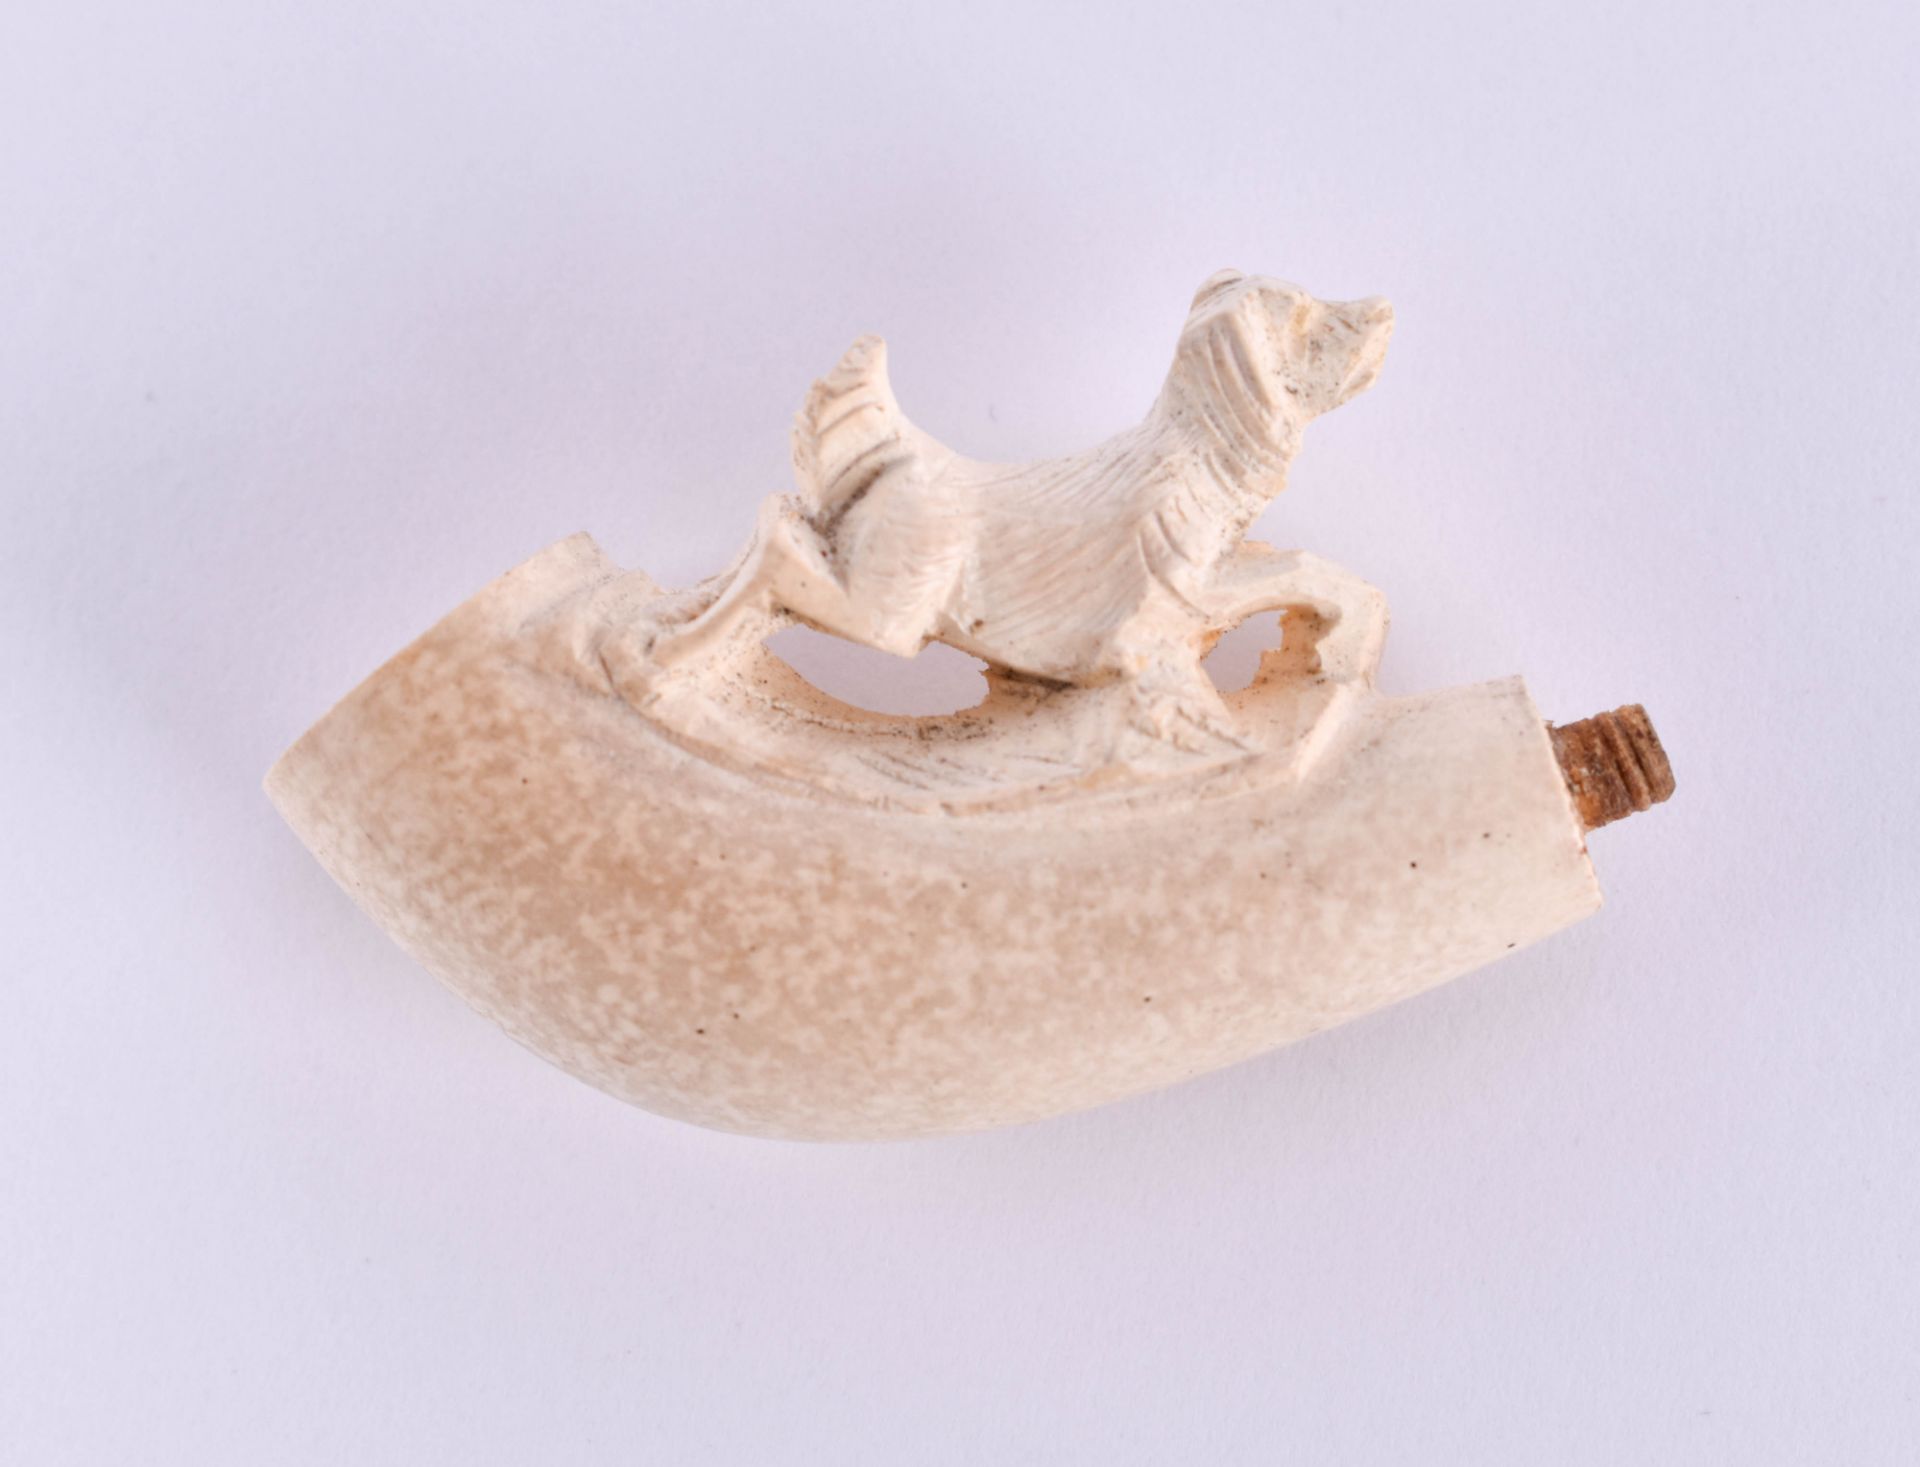 Cigarette holder meerschaumIvory cigarette holder in original case from the 20s, lace dimensions: